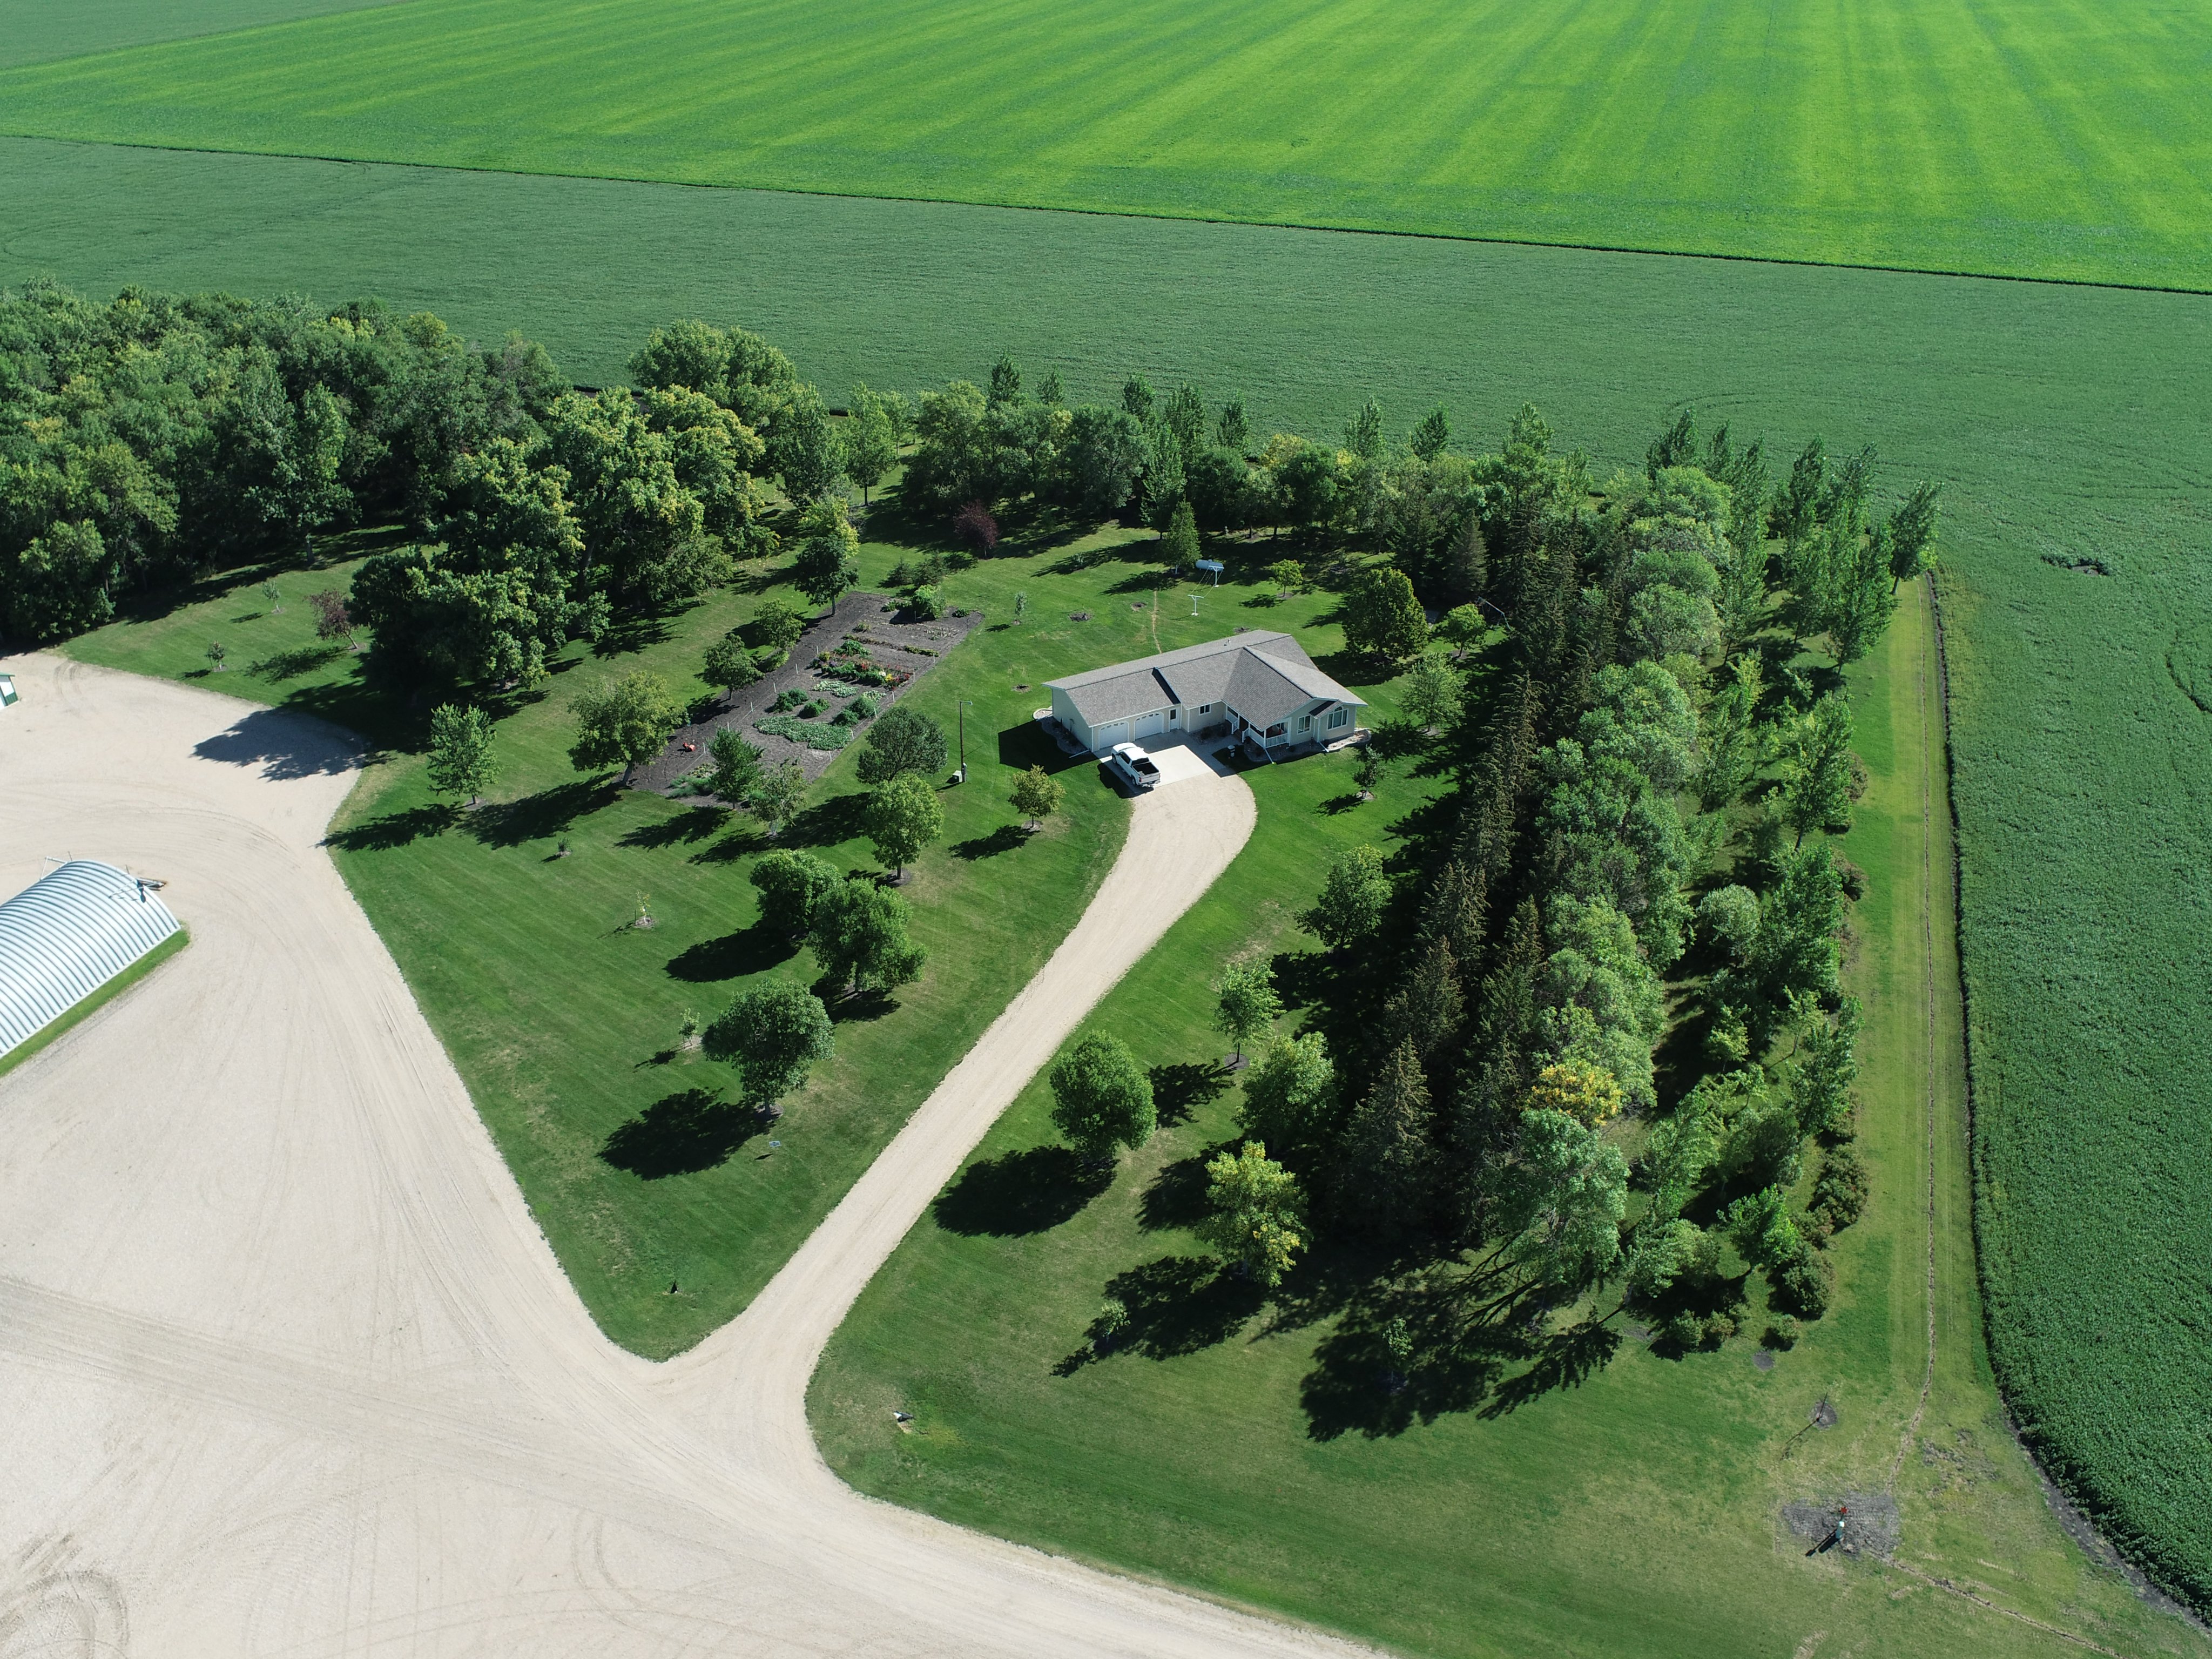 KITTSON SOIL AND WATER CONSERVATION DISTRICT - Kittson SWCD Home